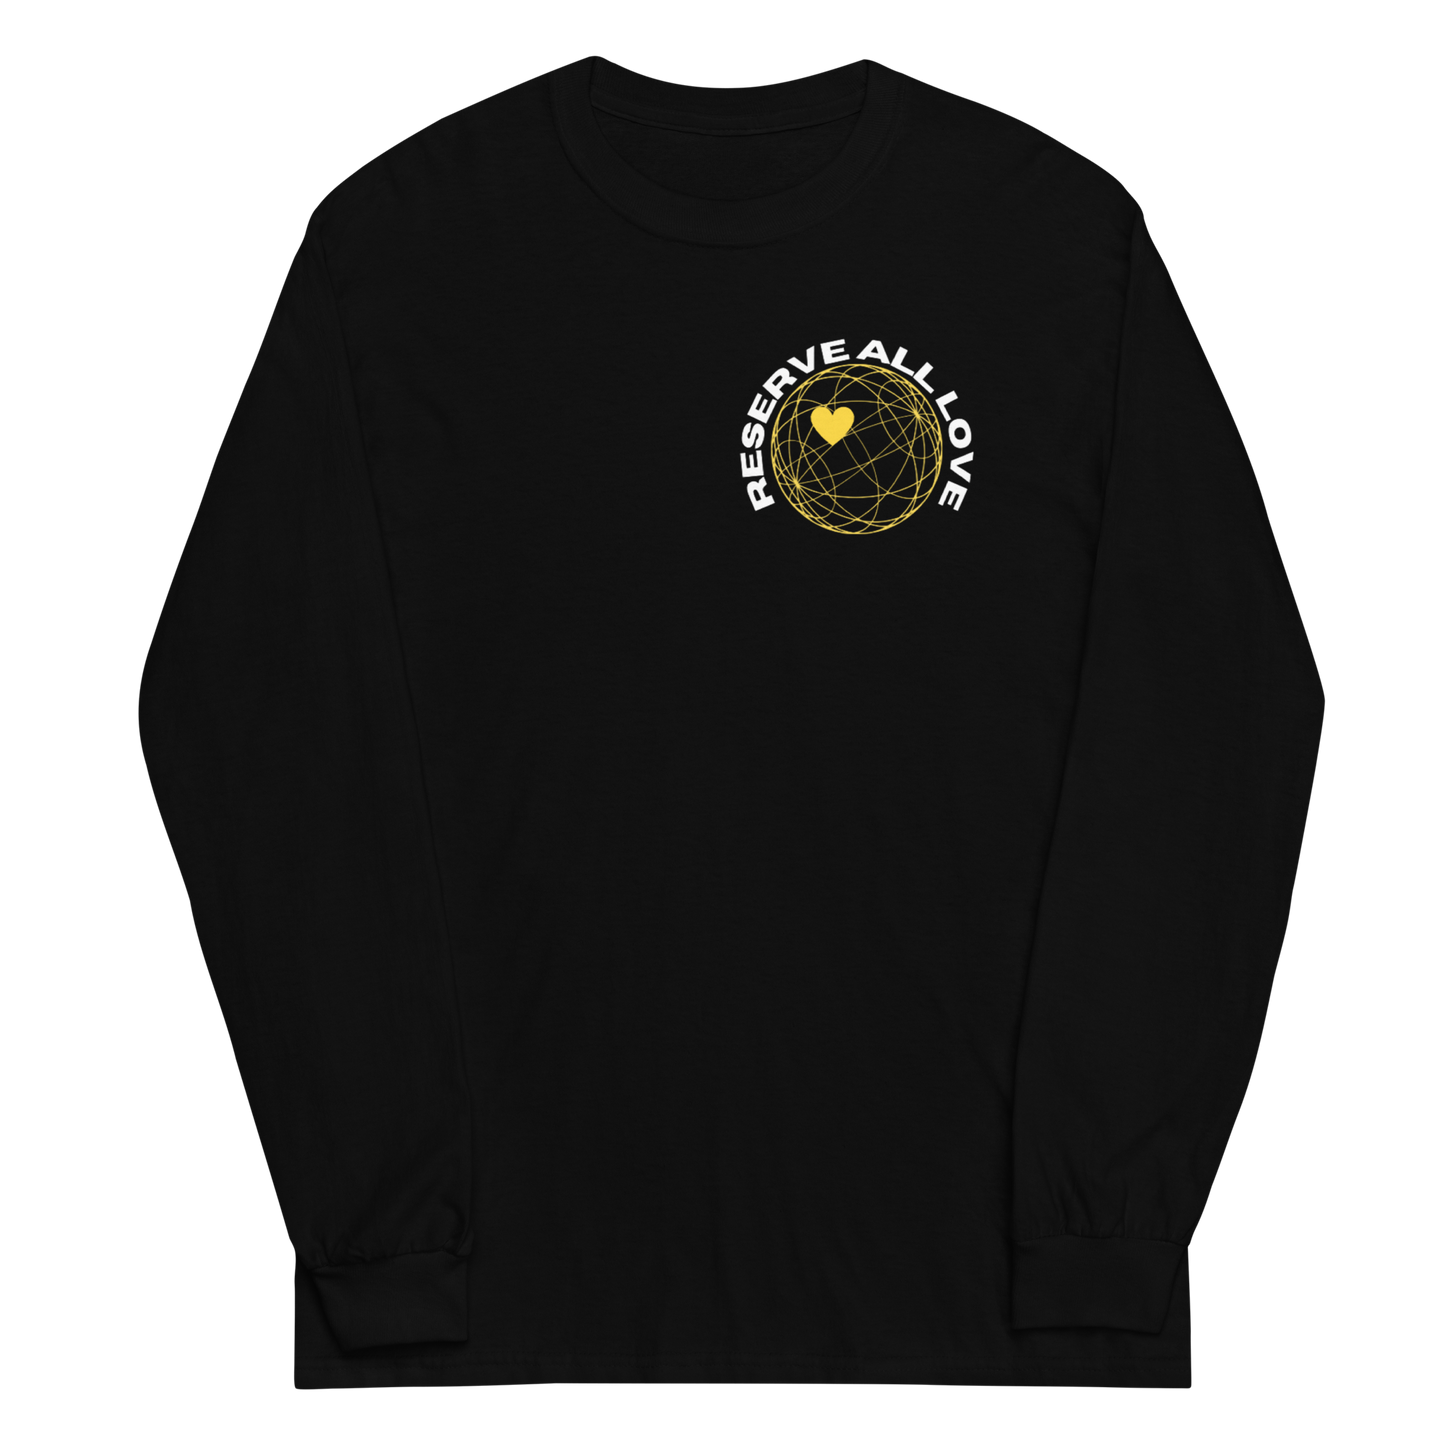 Reserve All Love Black and Yellow Long Sleeve Shirt